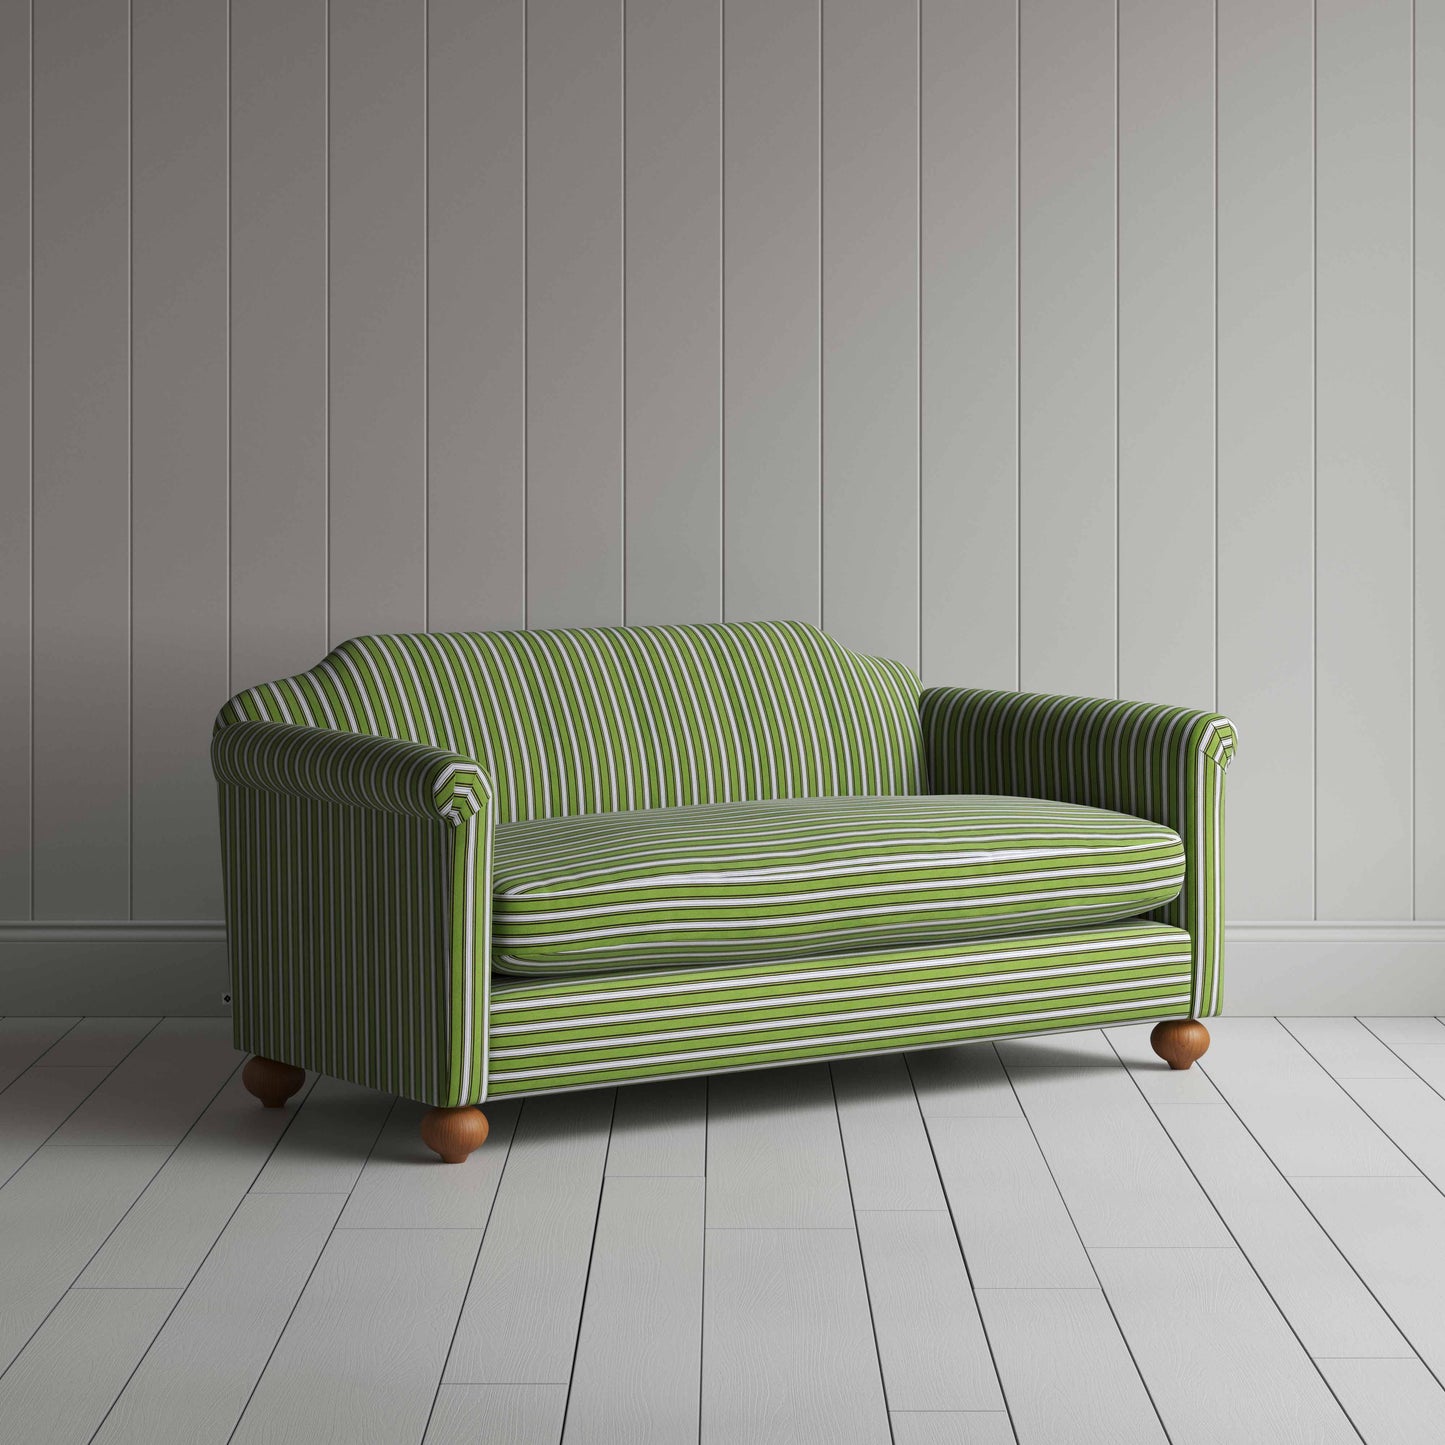 Dolittle 3 Seater Sofa in Colonnade Cotton, Green and Wine